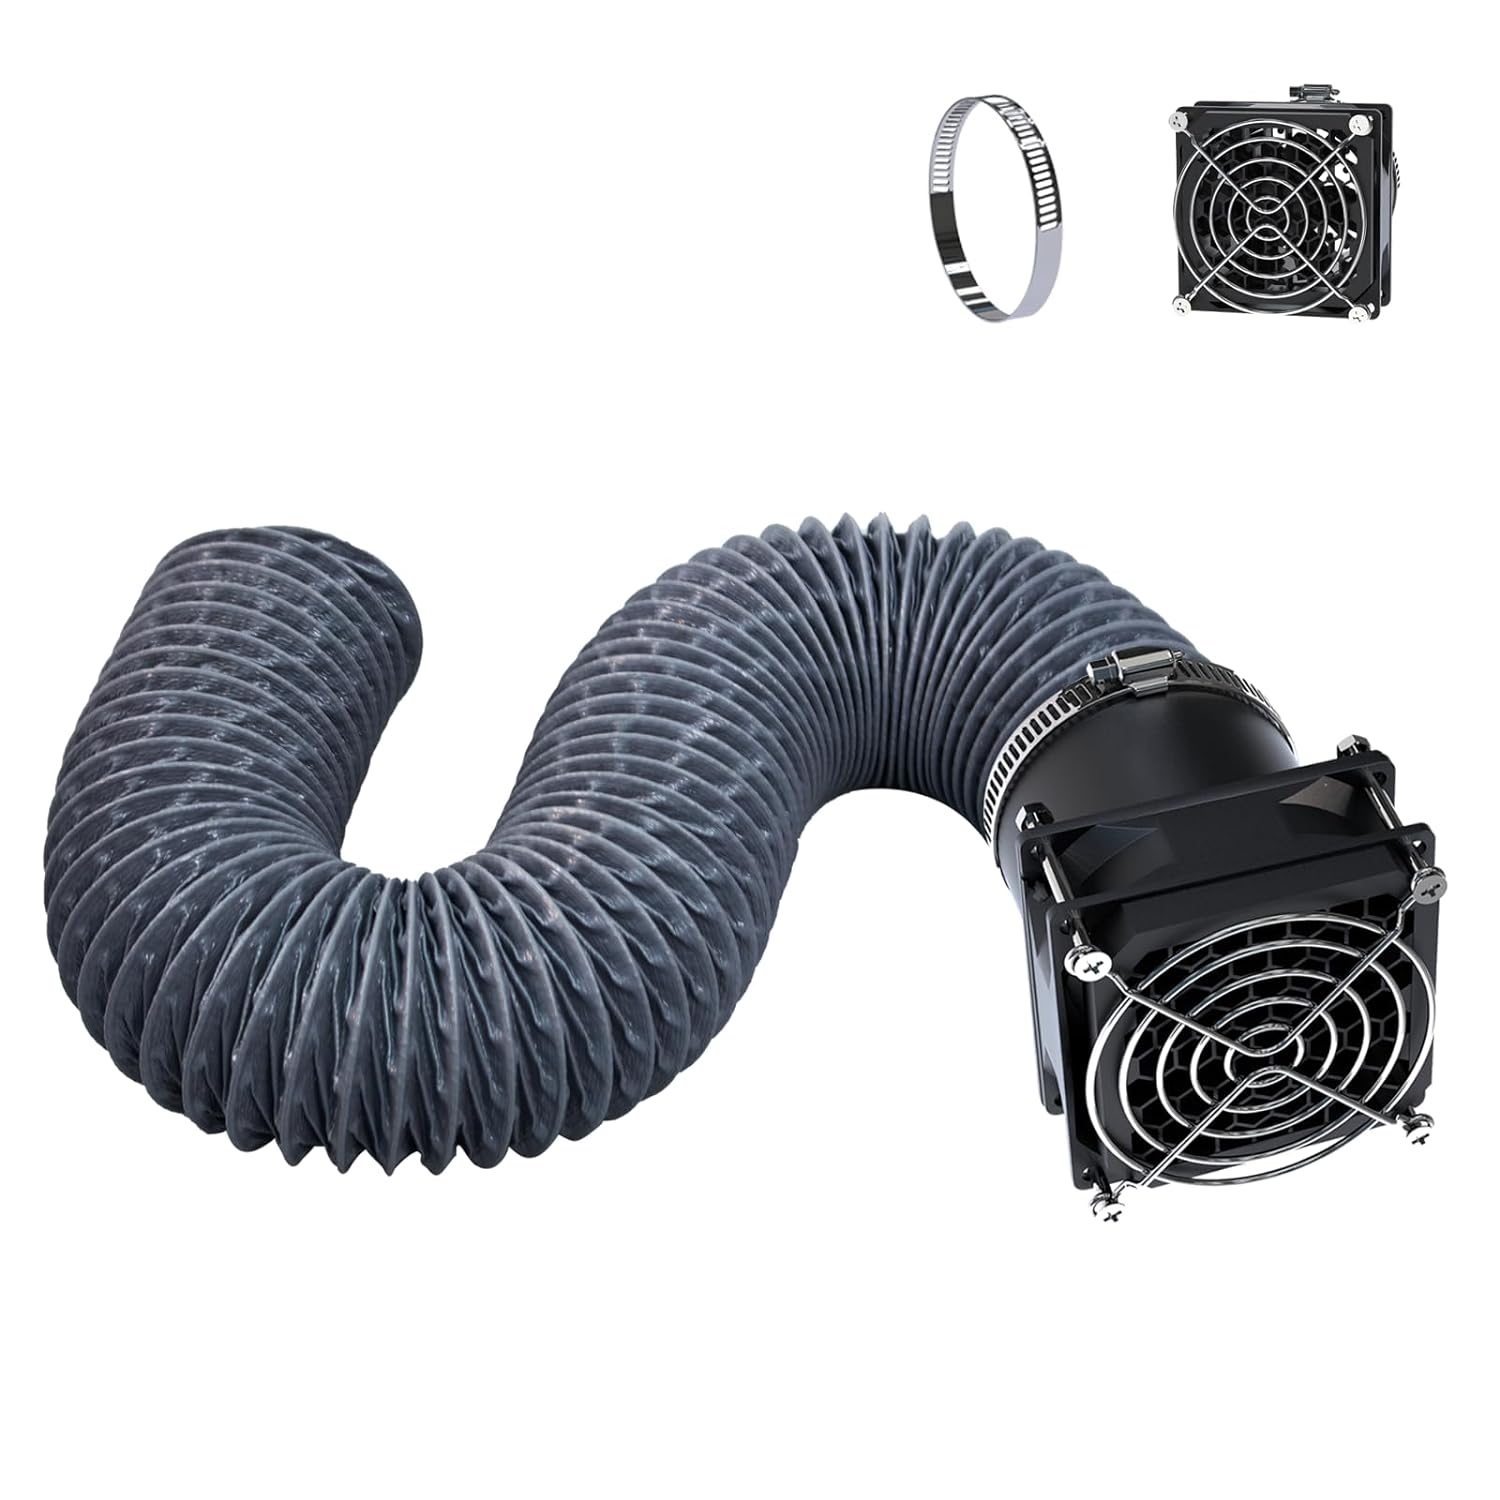 yoopai-fan-fume-extraction-kit-for-3d-printer-enclosure-exhaust-pipe-with-low-noise-exhaust-fan-efficient-ventilation-ex YOOPAI Fan Fume Extraction Kit Review